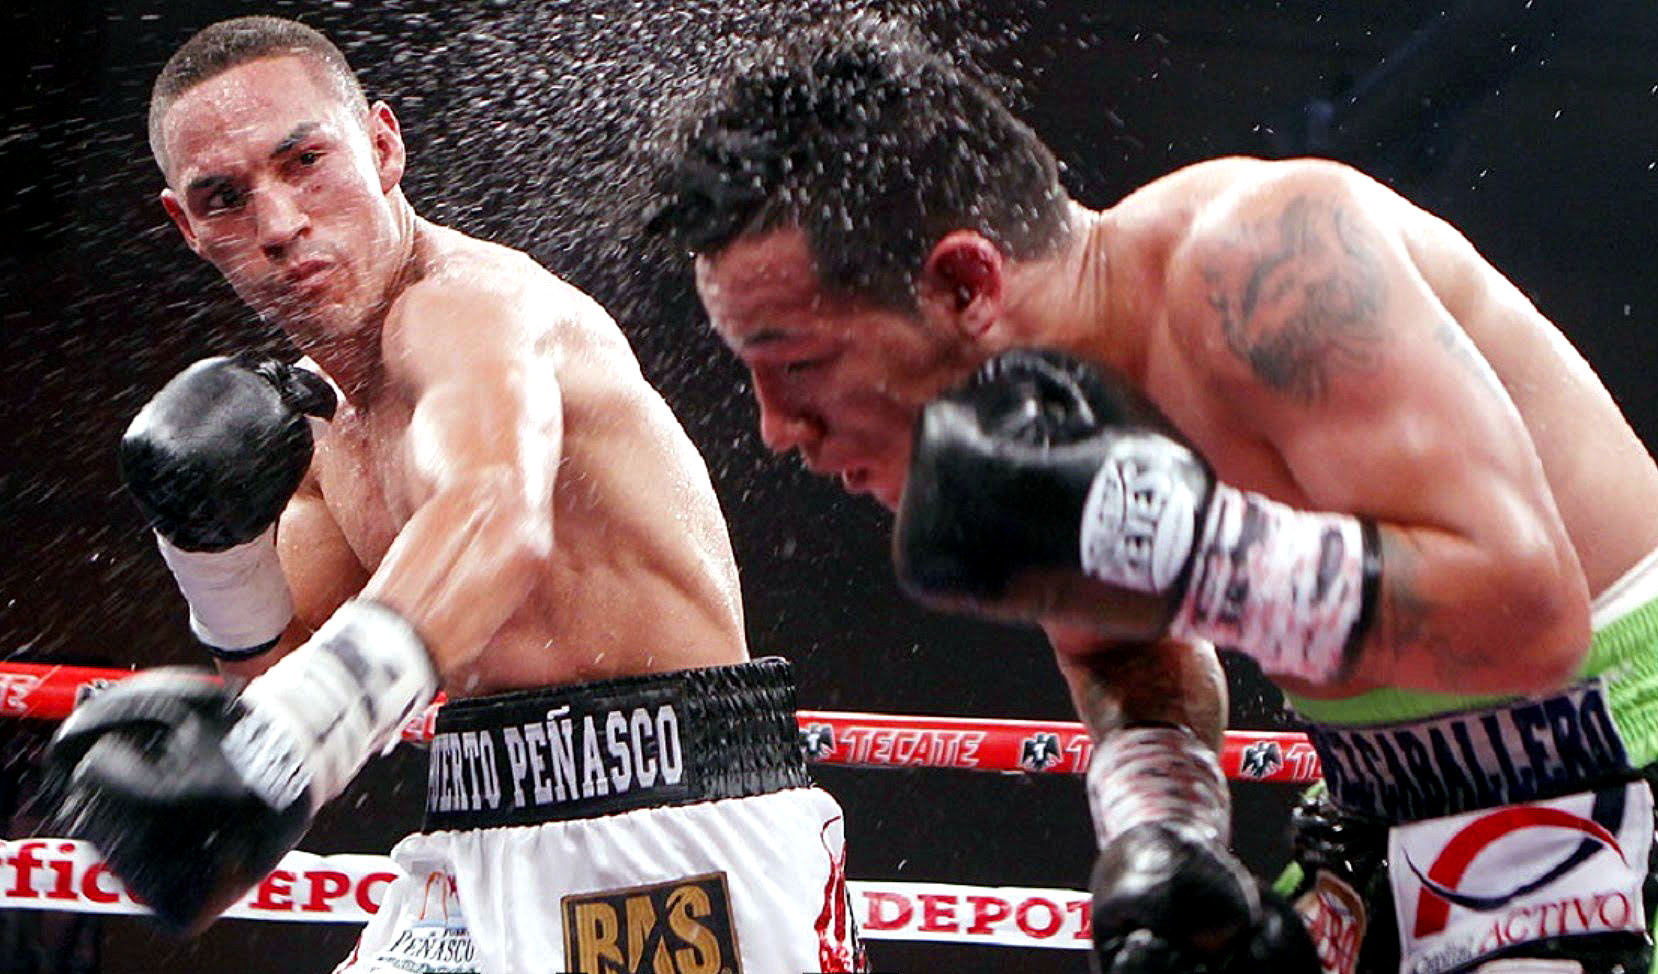 In his last bout Estrada knocked out Hernan Marquez at 1:16 of round 10. (Photo: Courtesy)